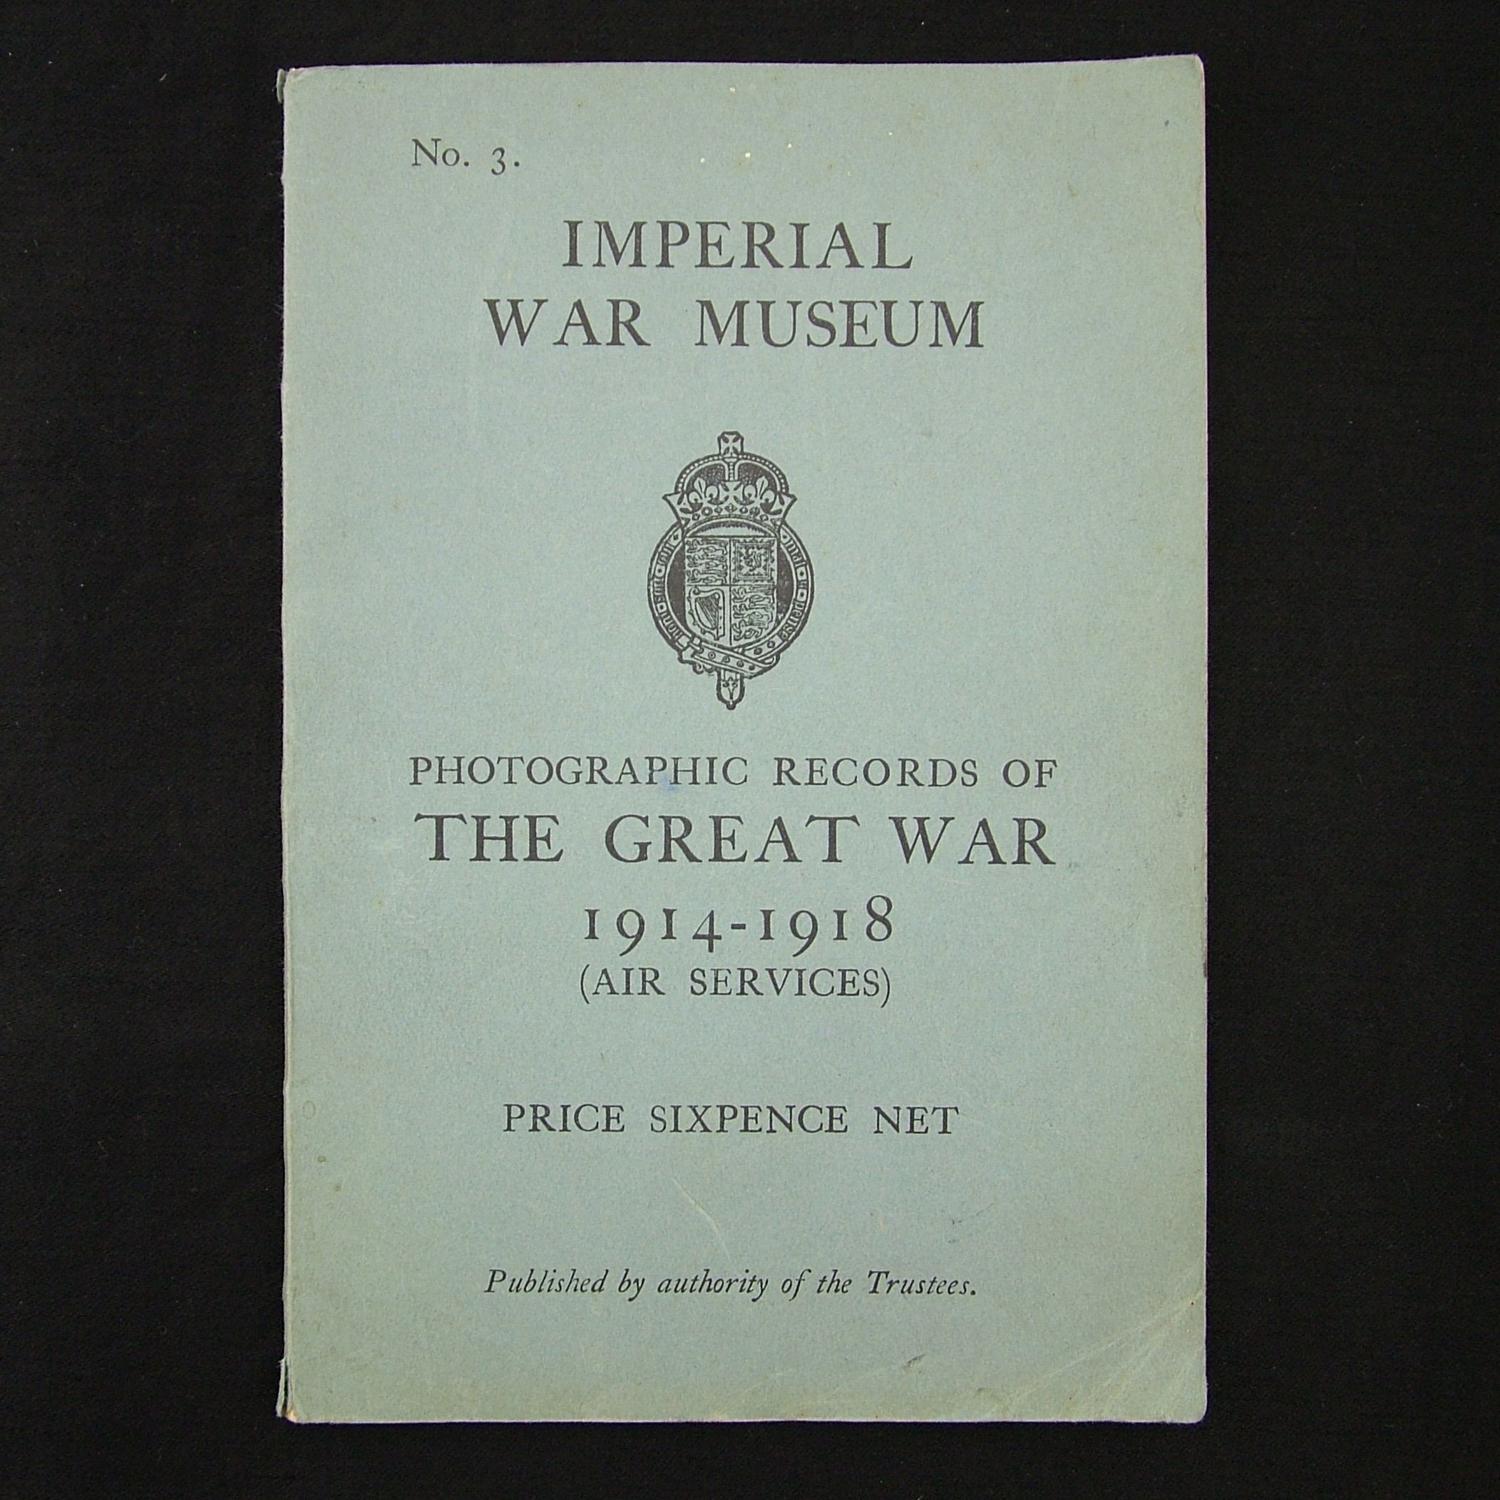 Photographic records of the Great War (Air Services)